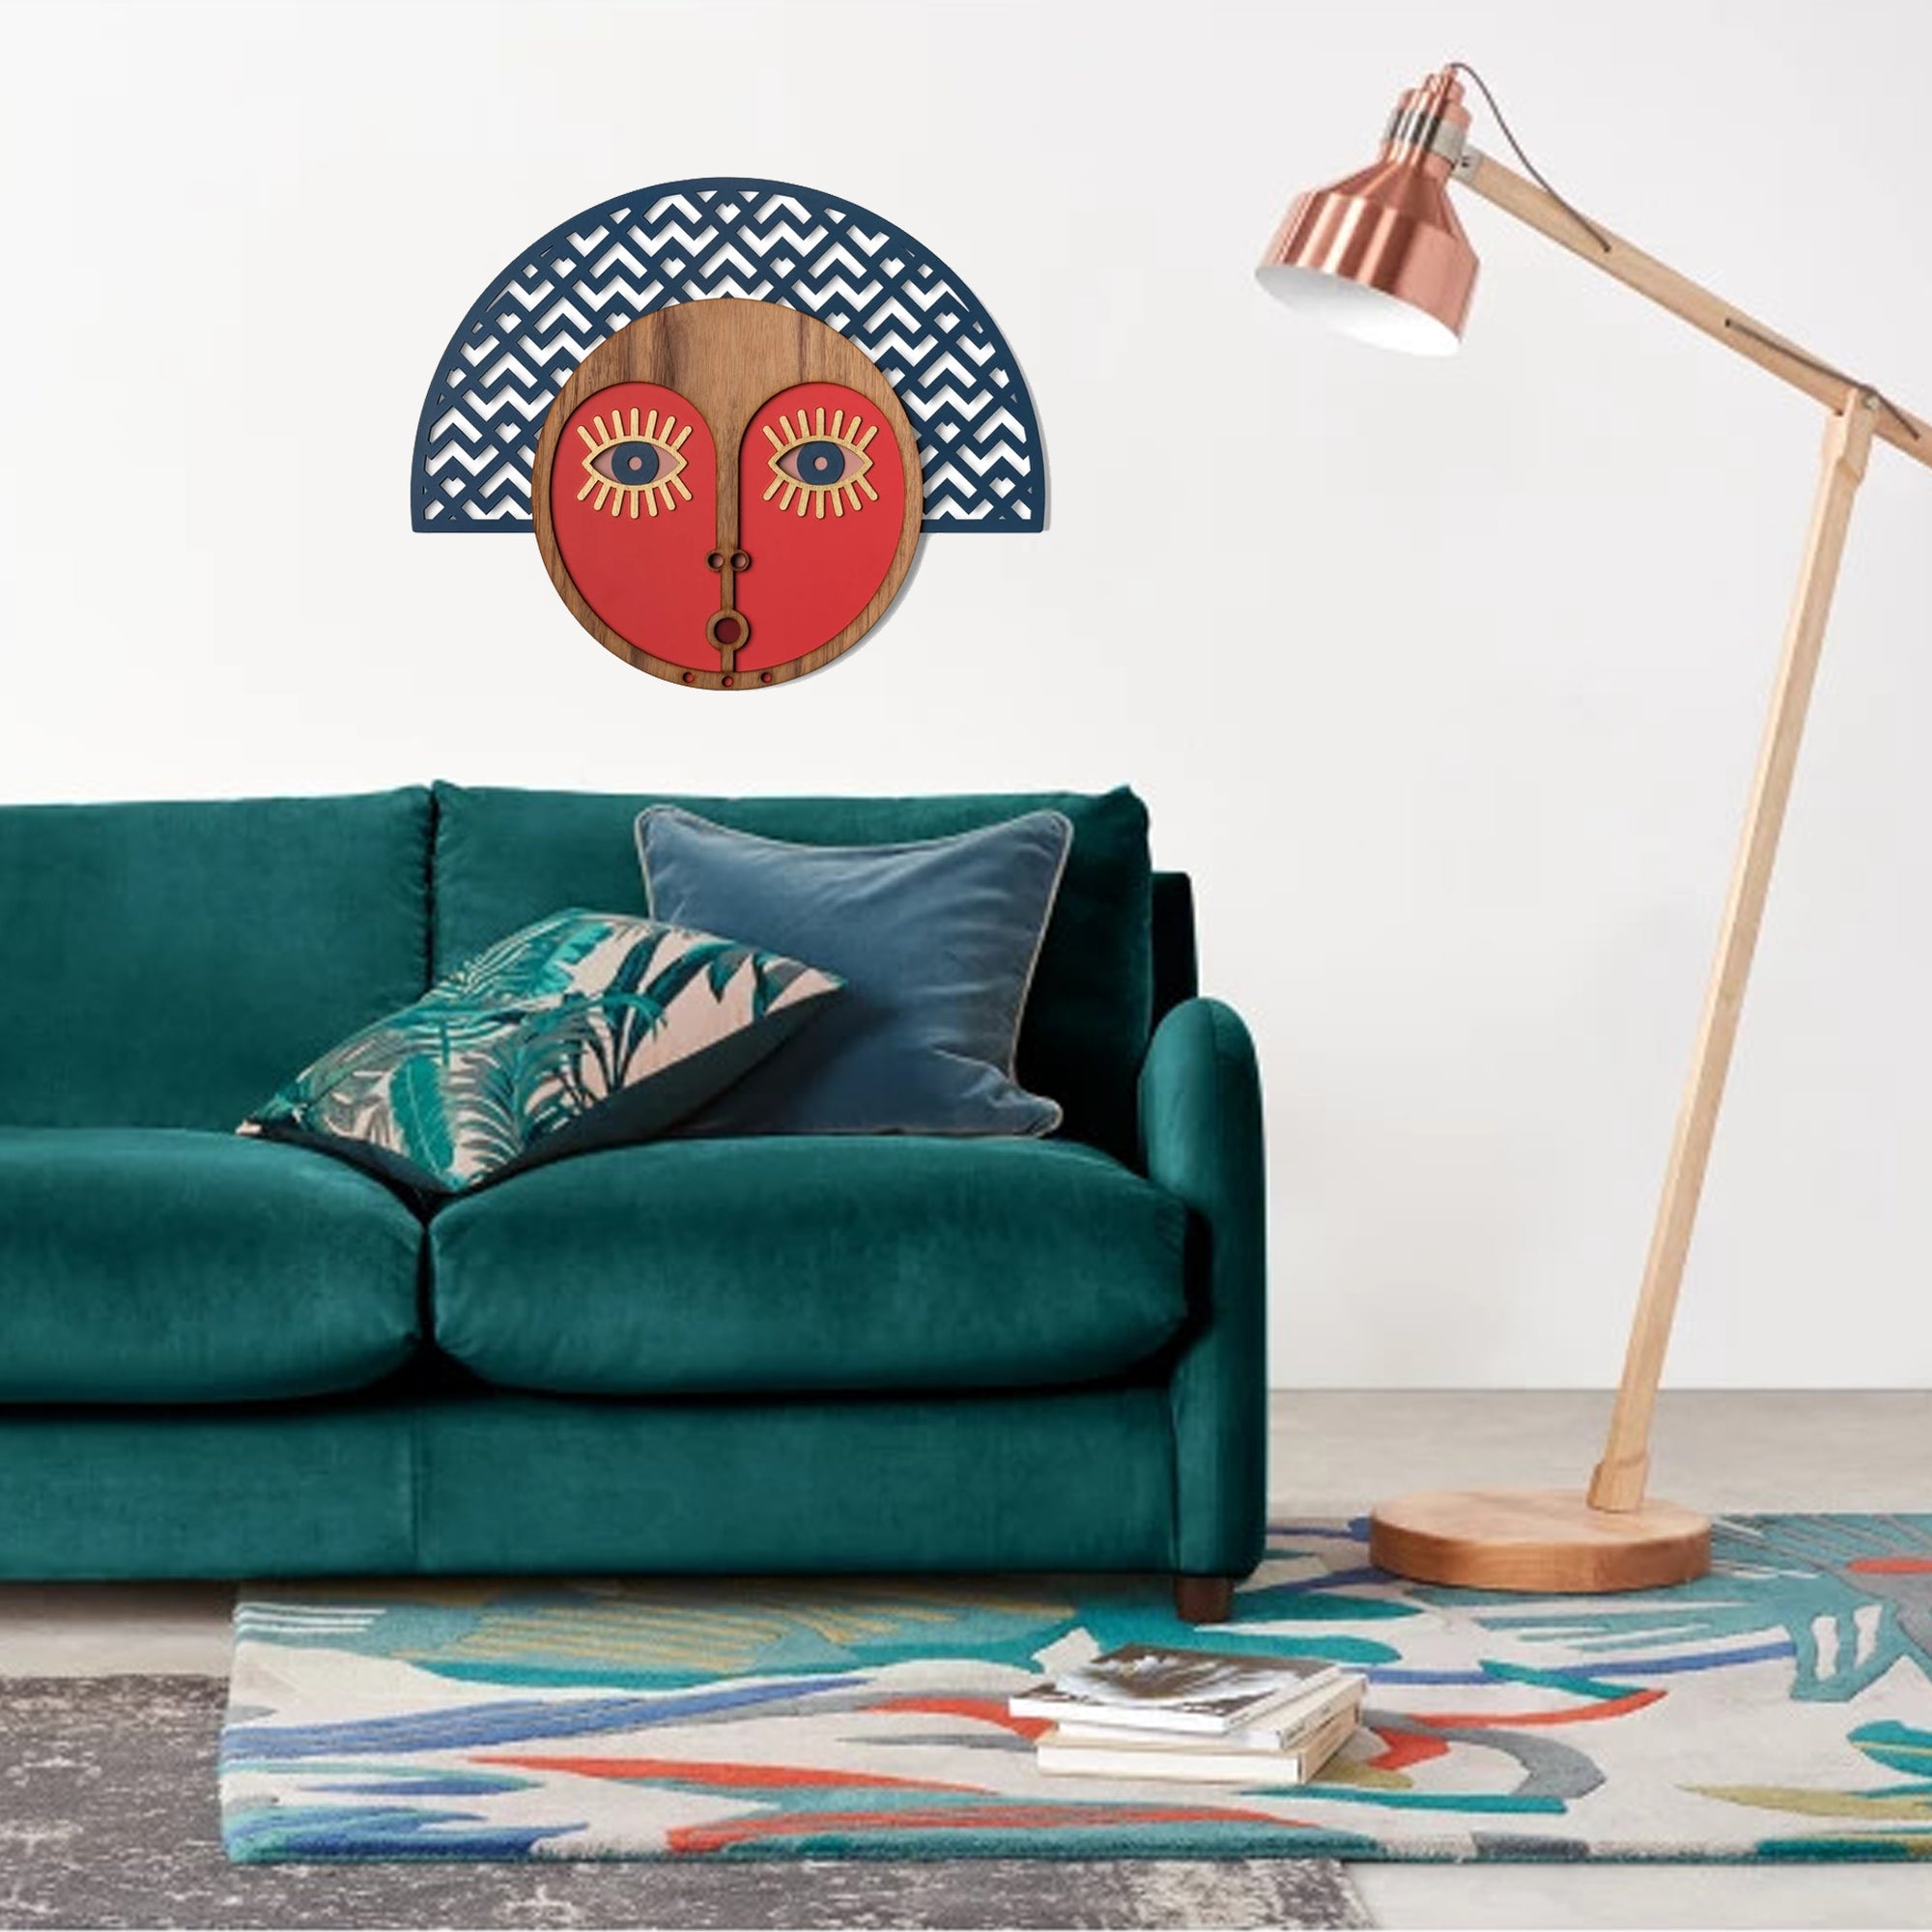 Wood Wall Art with African Wall Mask